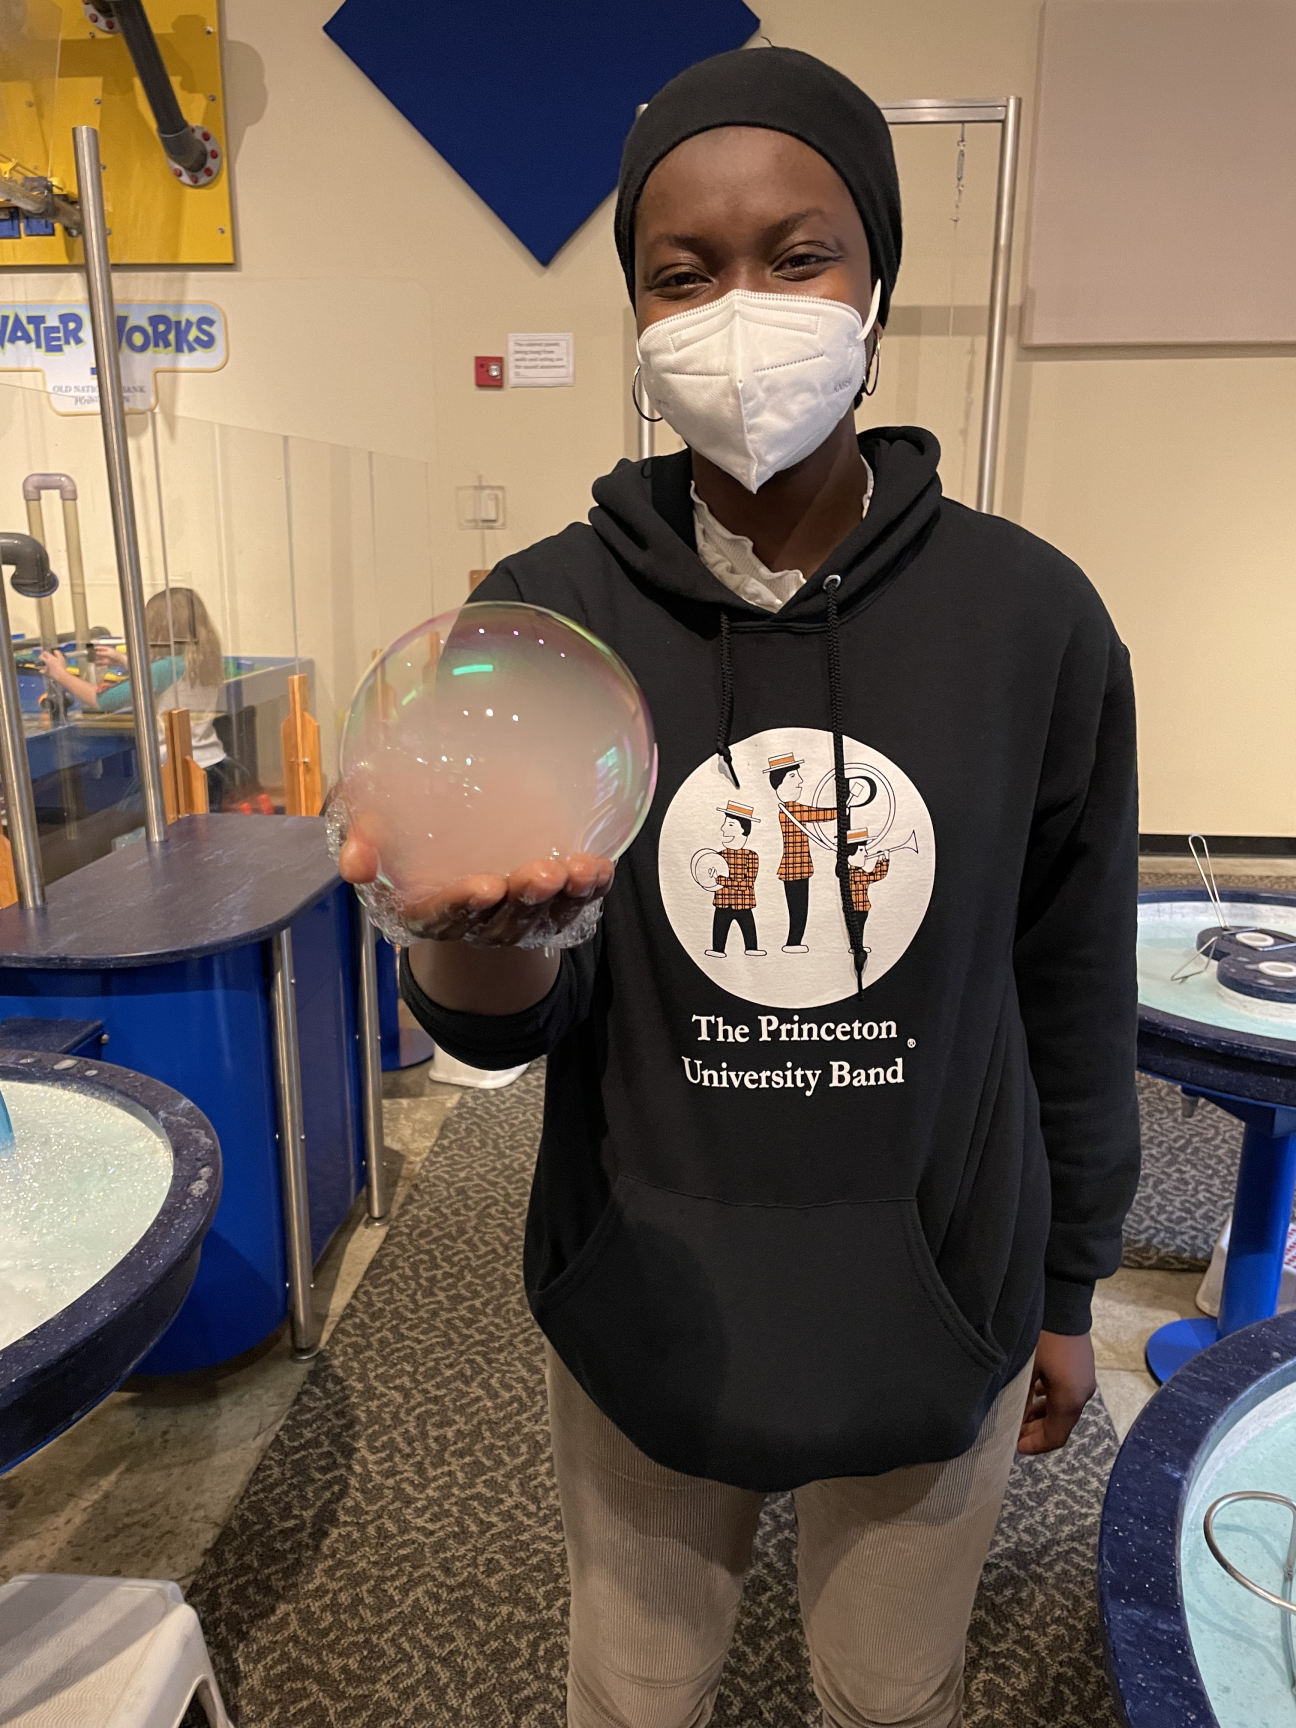 Aminah in a science museum with a "mist-filled" bubble in her hand